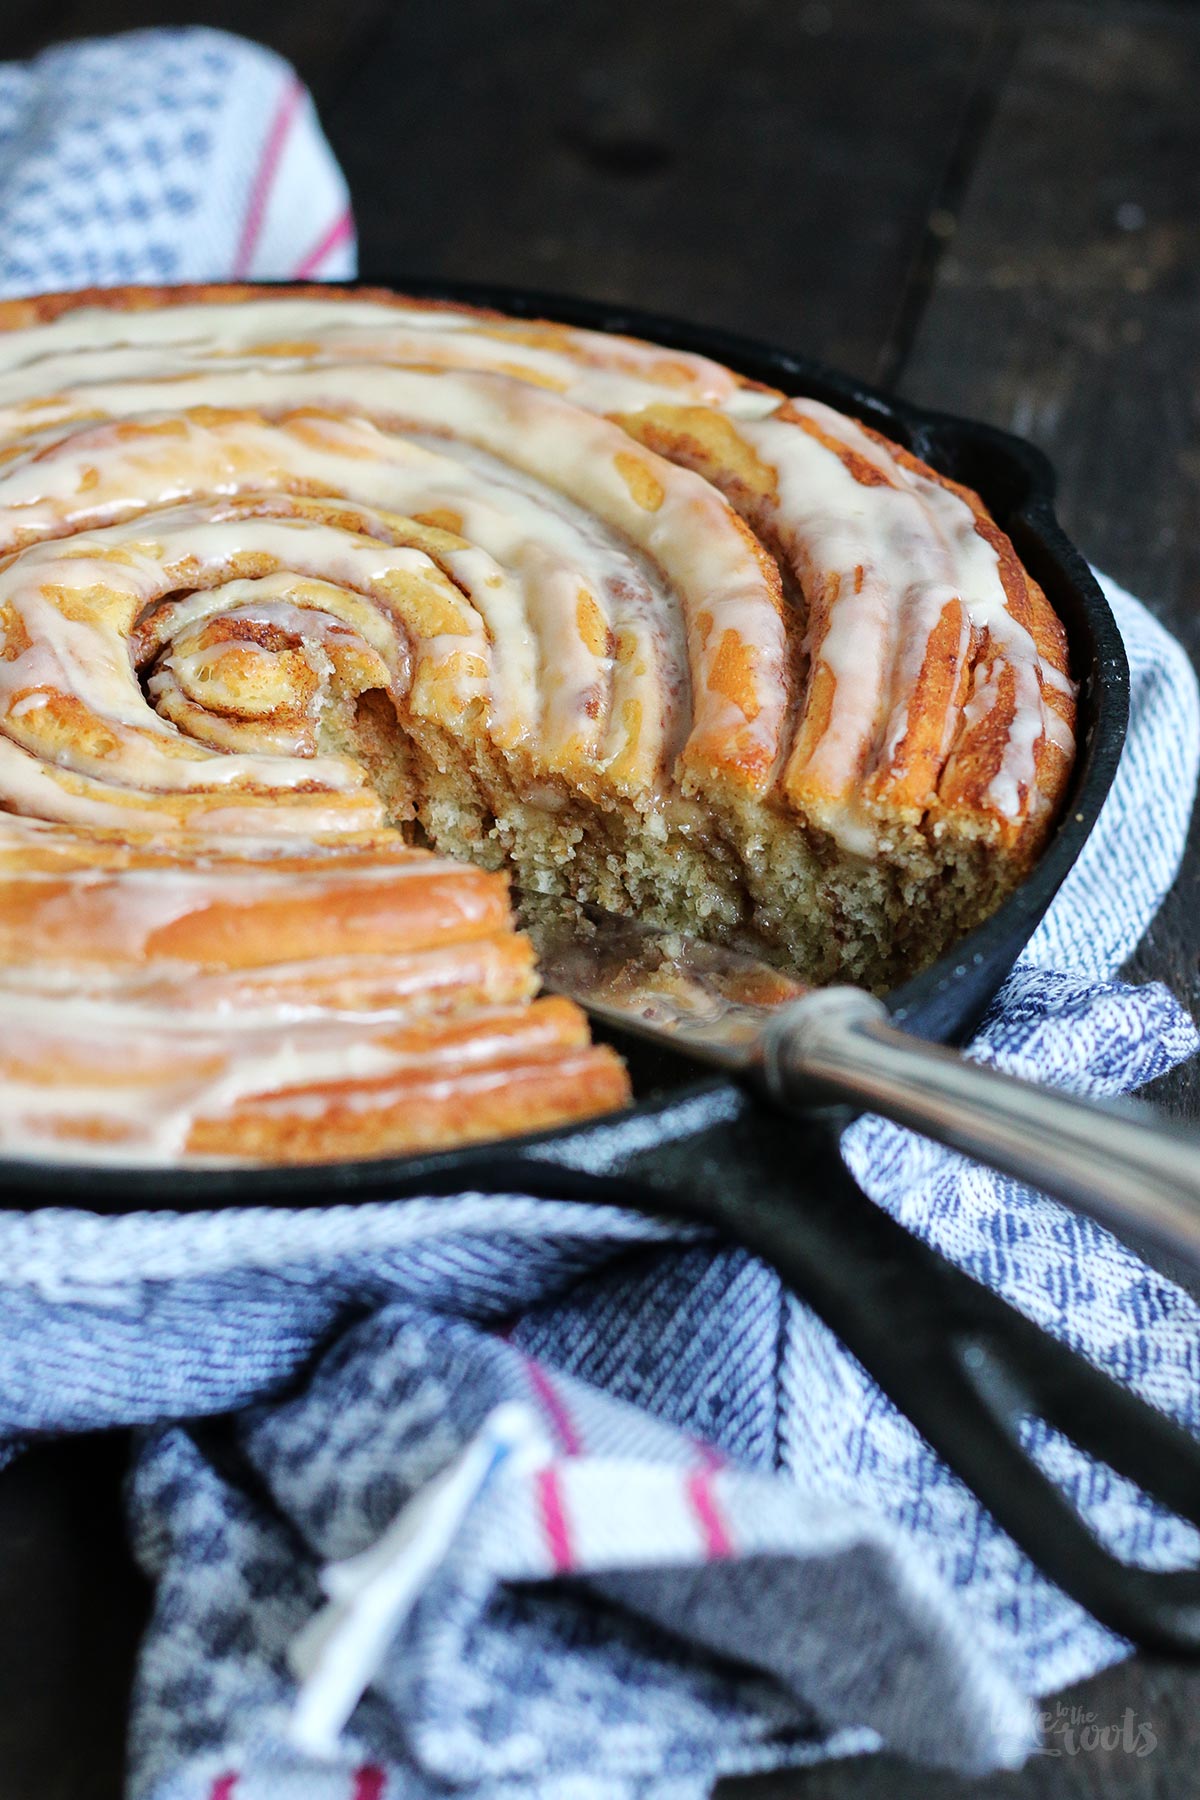 XXL Cinnamon Roll Cake | Bake to the roots